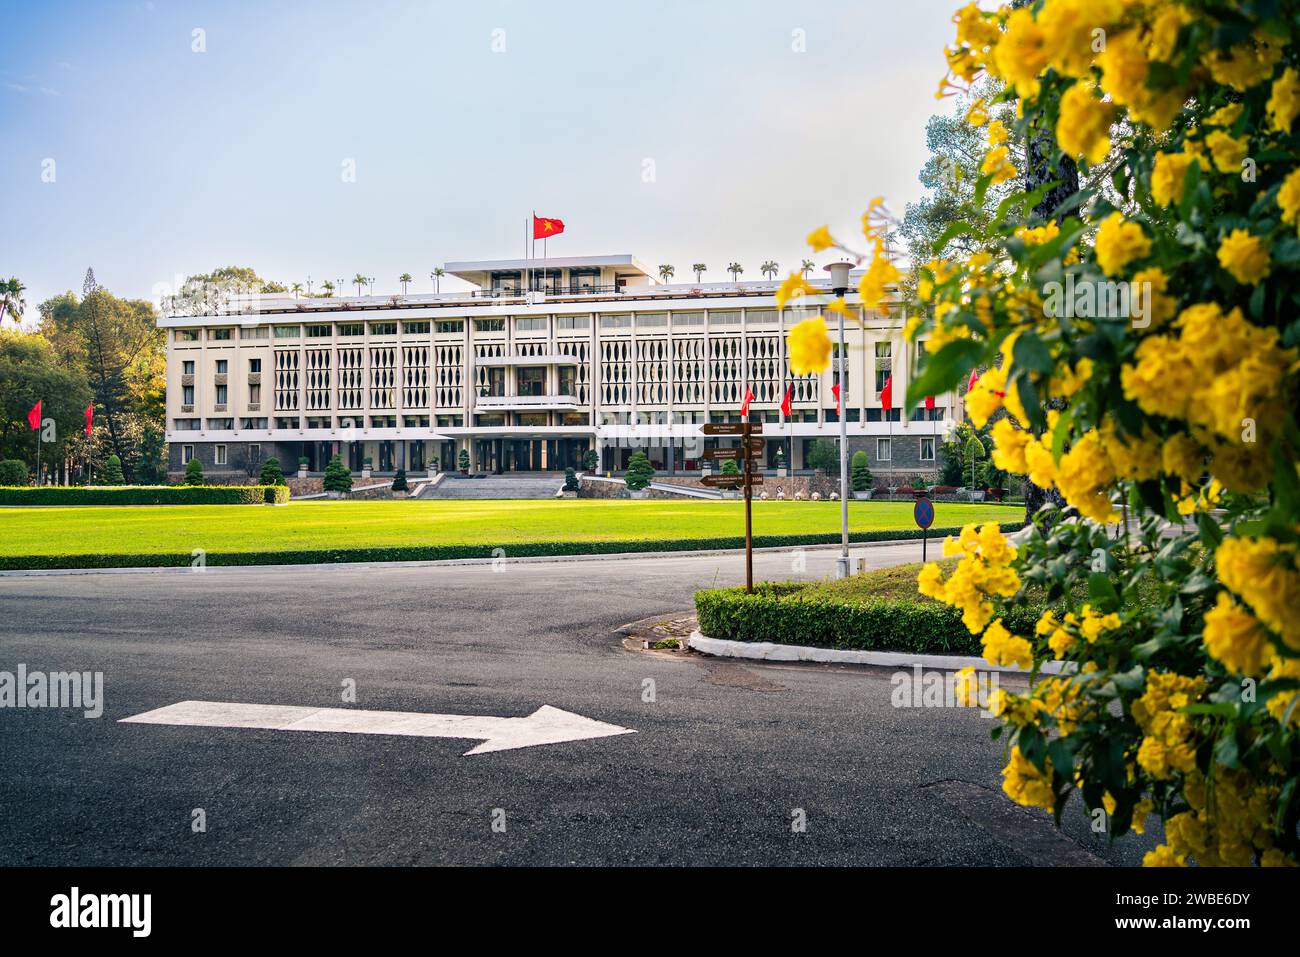 Independence and Reunification Palace in Vietnam. Ho Chi Minh City, Saigon. Government building and travel and tourism landmark. Stock Photo